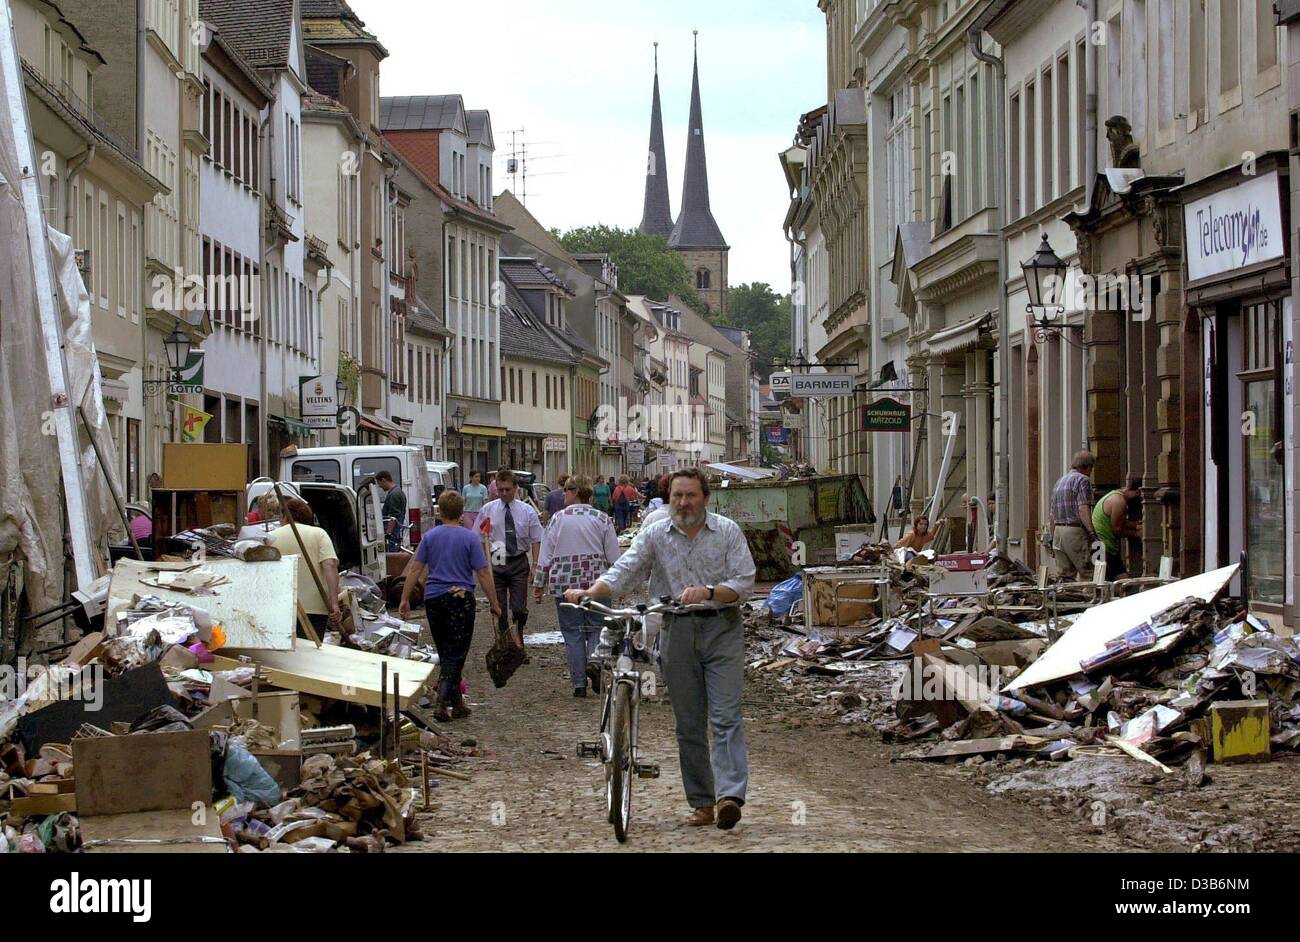 (dpa) - The shopping street of Grimma, Germany, is strewn with the belongings of the residents and shops washed ashore two days after the flood, 15 August 2002. On 16 August, the government started its financial support, transferring 47 million Euro to the affected regions in Saxony, Saxony-Anhalt a Stock Photo